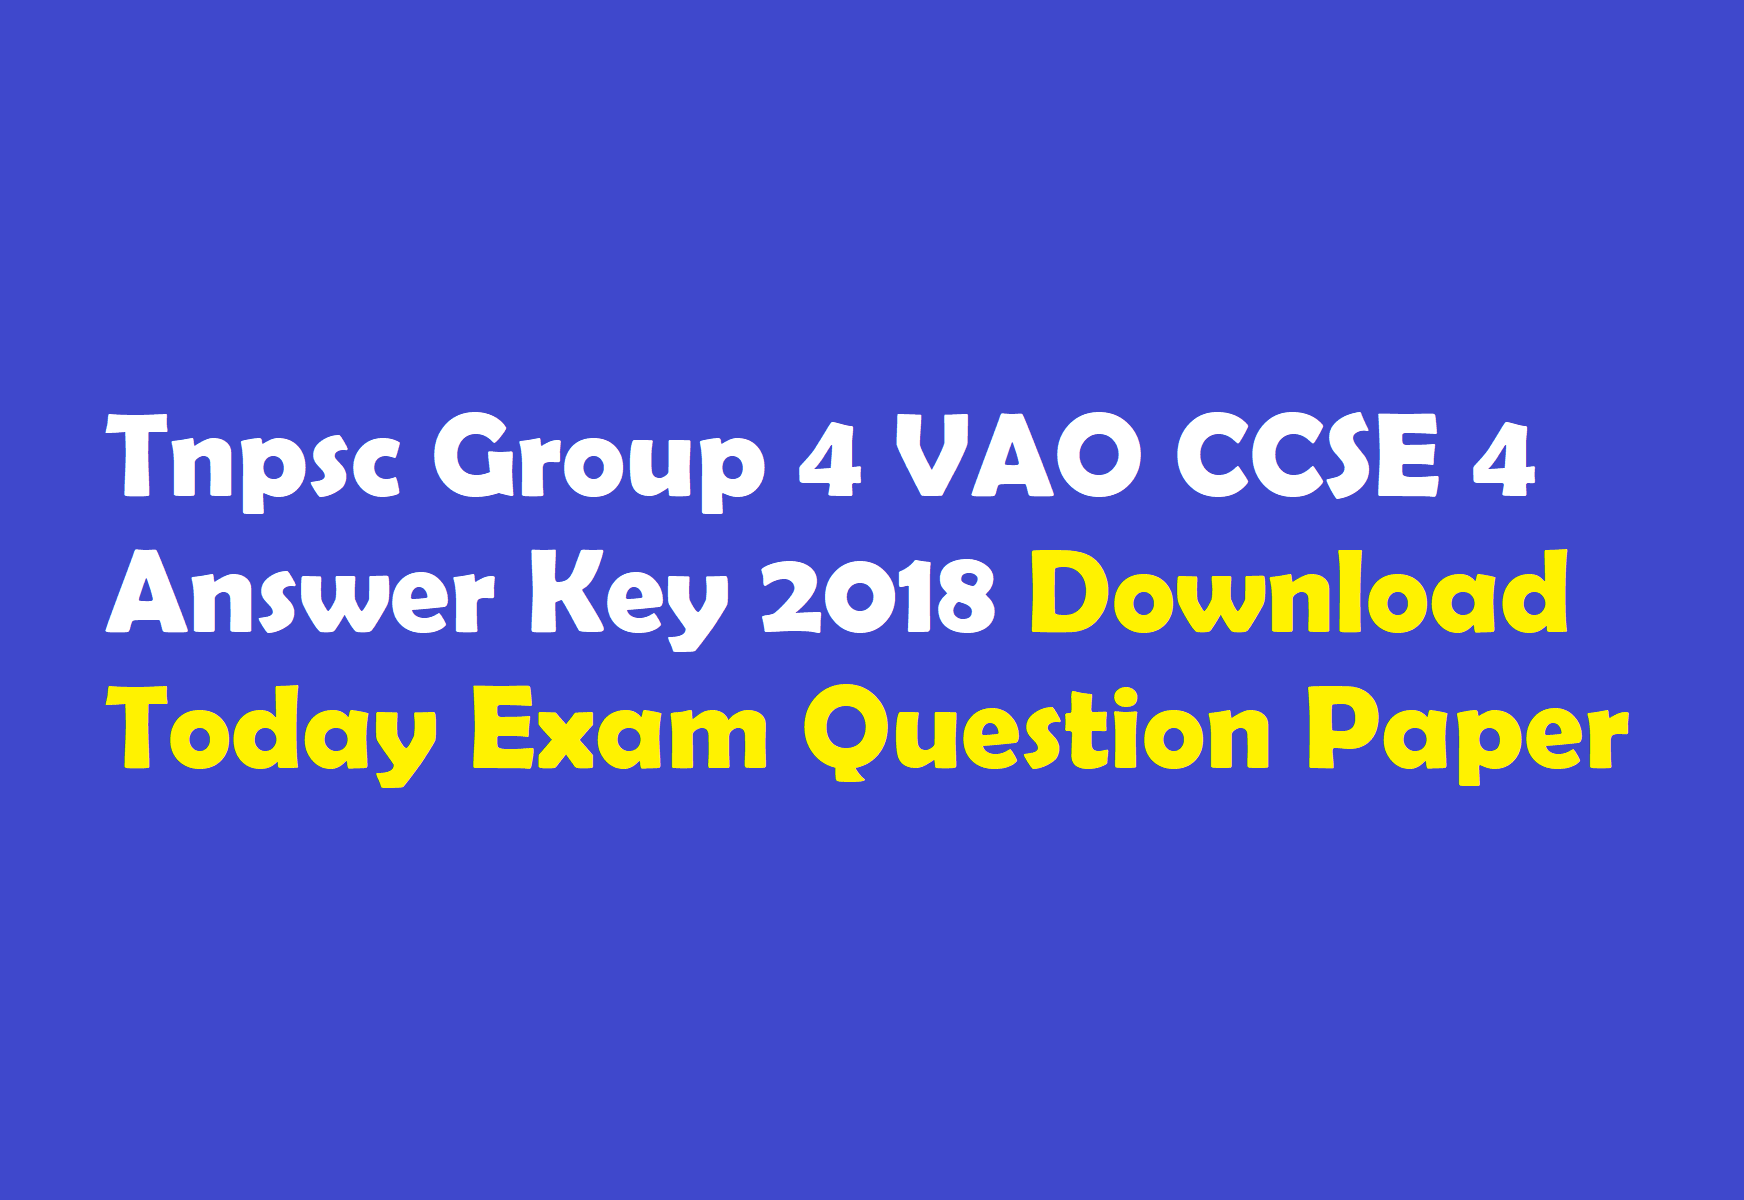 Tnpsc Group 4 Vao Ccse 4 Answer Key 2018 Download Question Papers Winmeen 5154